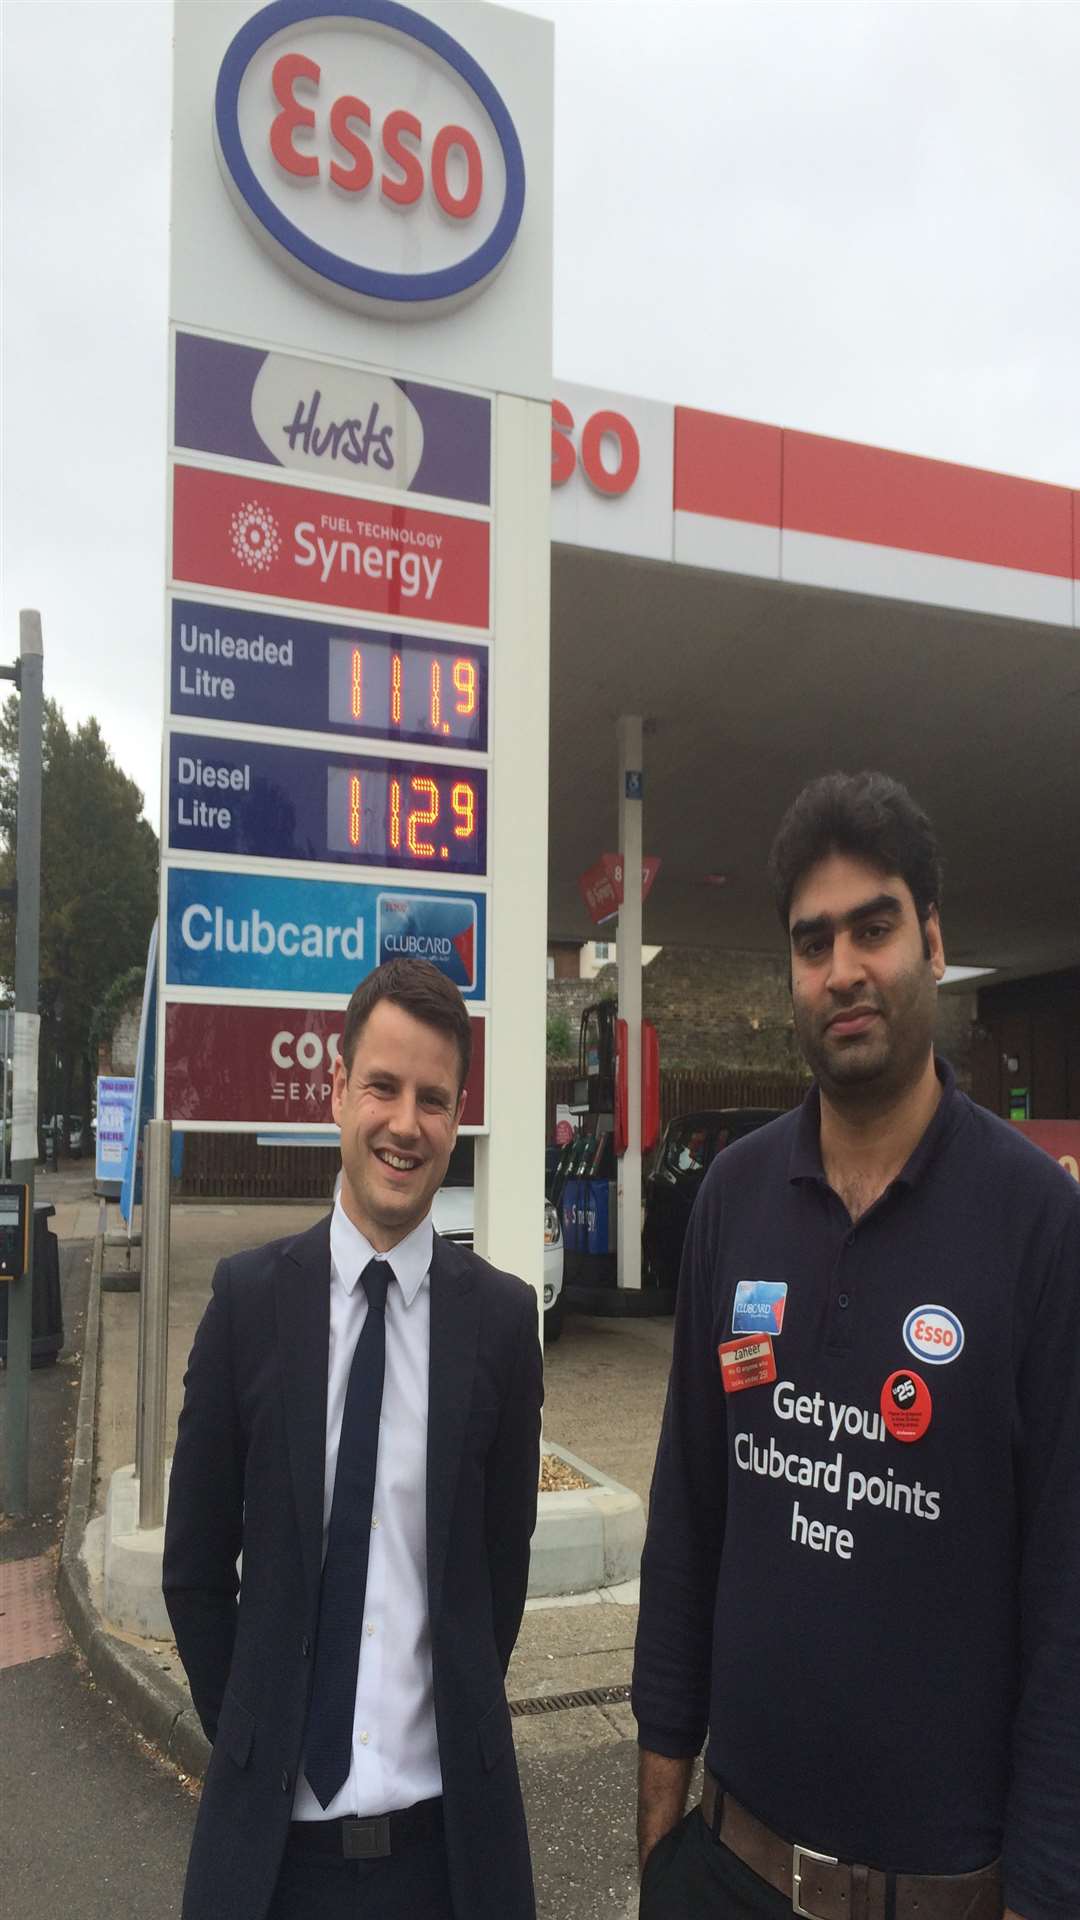 MRH Retail's area manager Paul Doe with petrol station manager Zaheer Ullah at the Esso station in New Road, Chatham